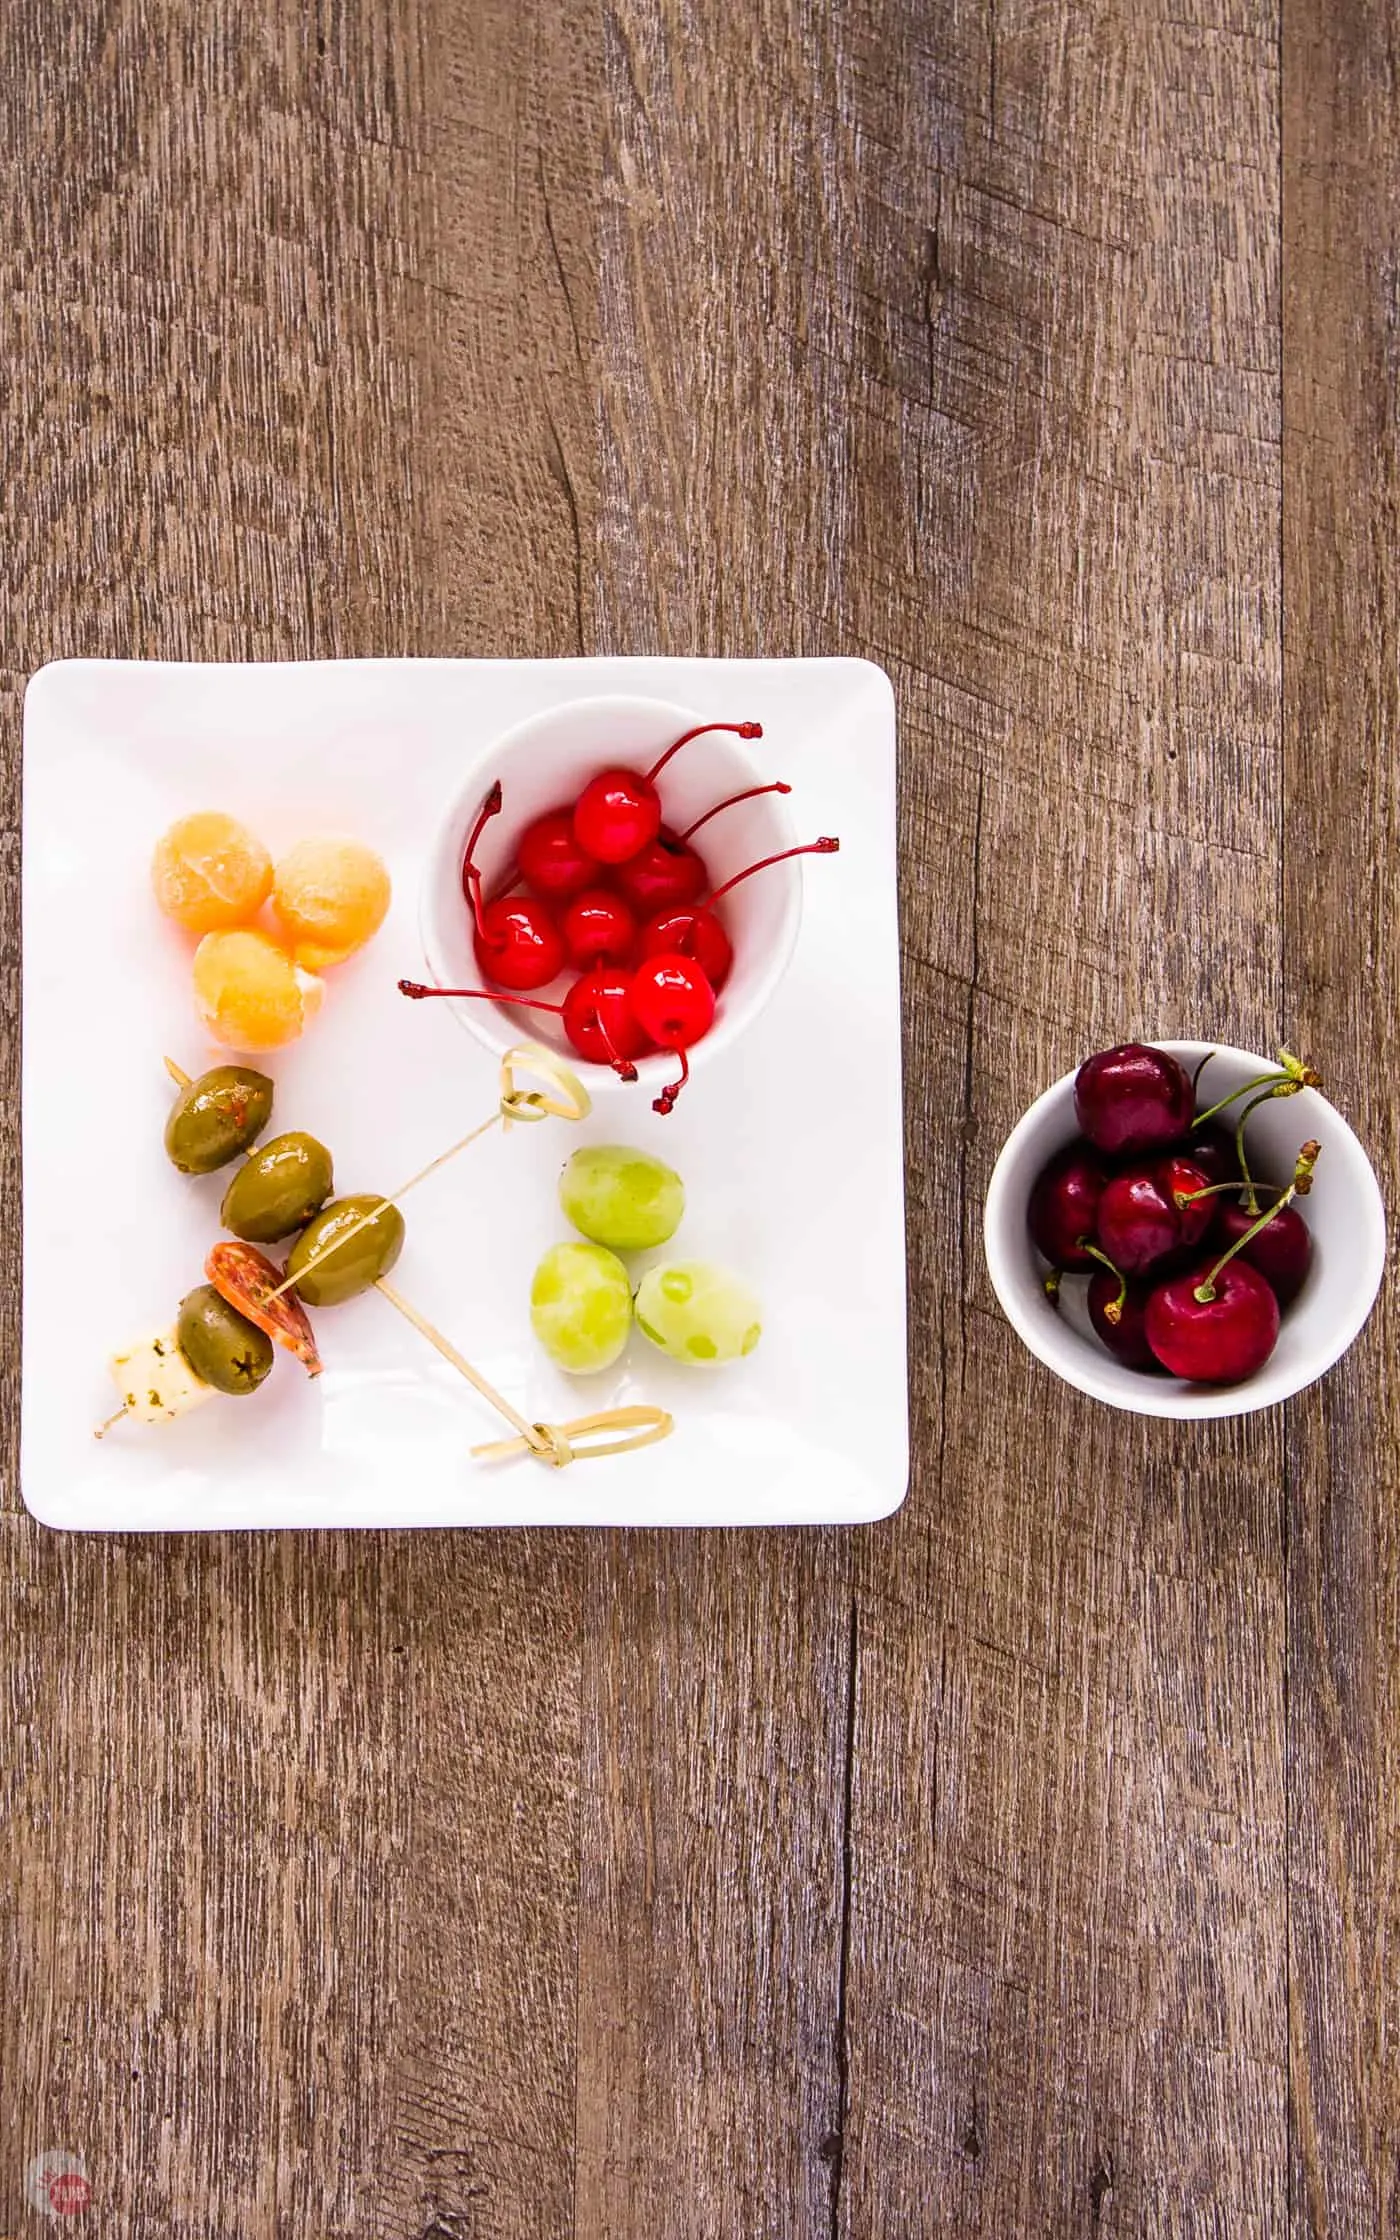 Skewered olives, 2 different cherries in bowls and sugared grapes on a plate